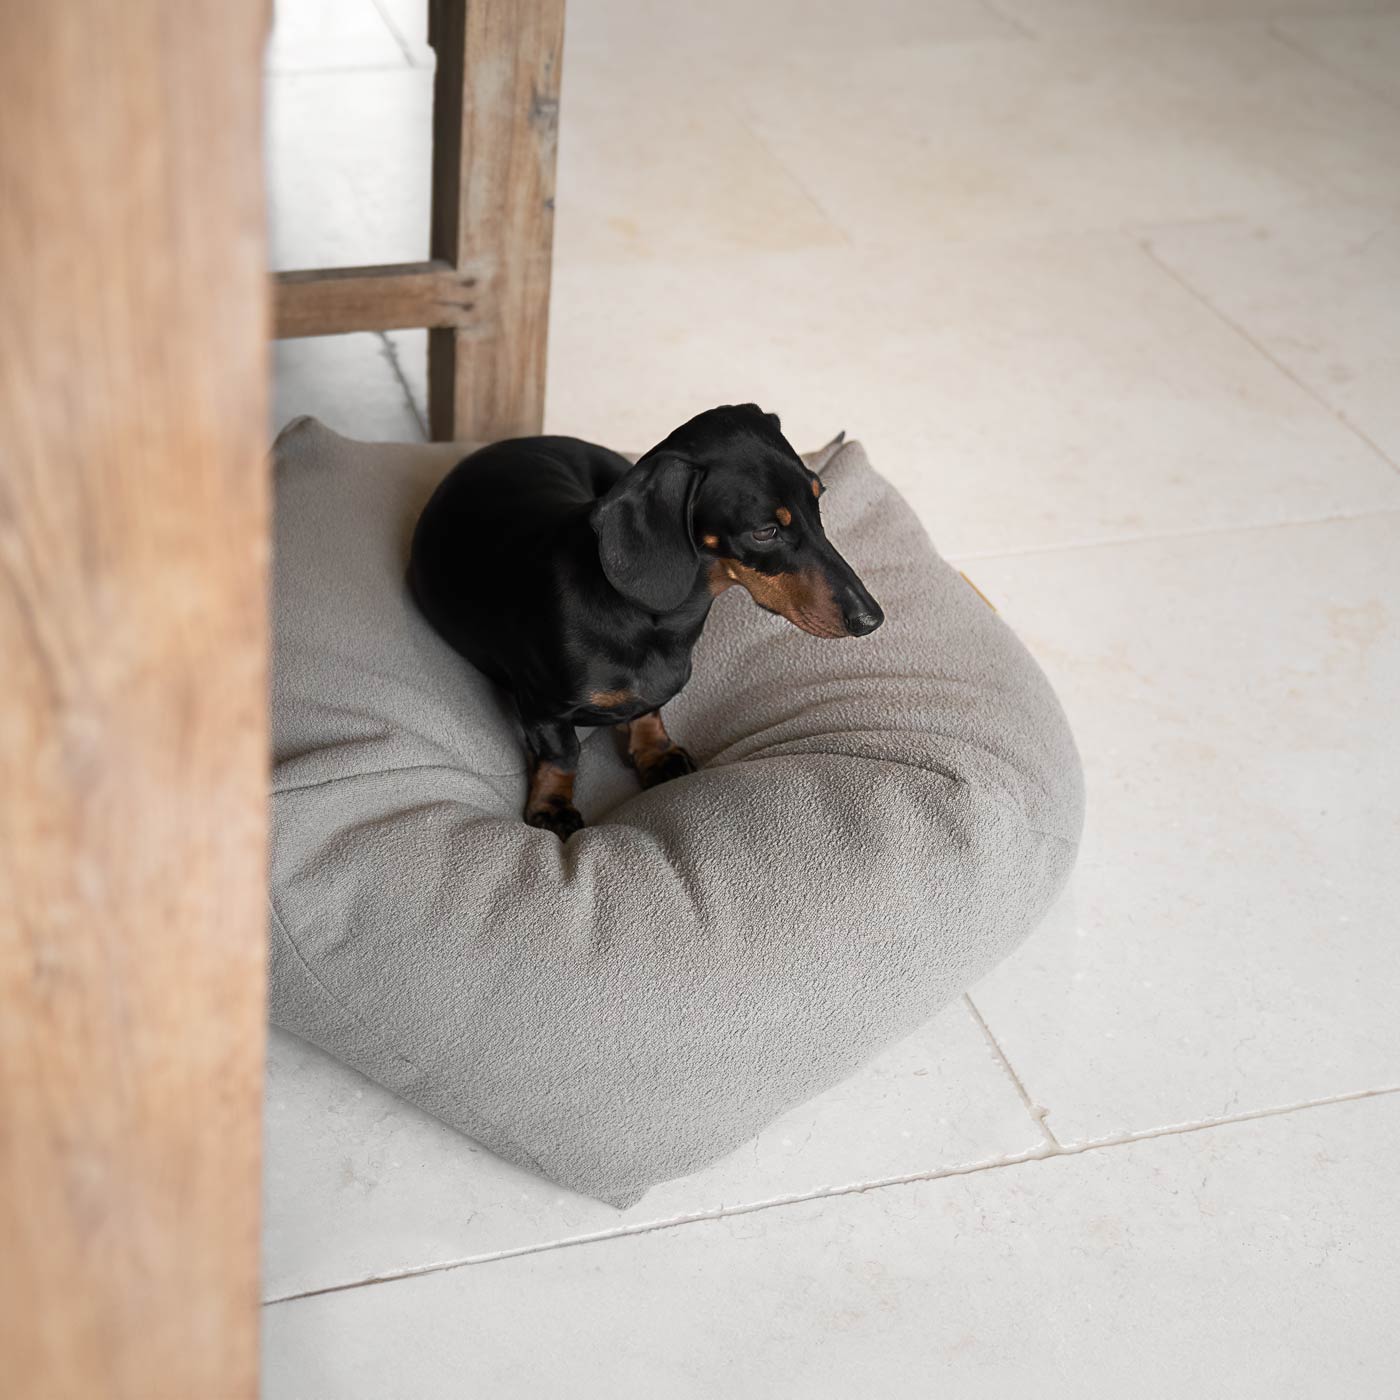 Lords & Labradors Snooze Pouff Puffy Pet Bed, Luxury Beds For Dogs, Available Now at Lords & Labradors US